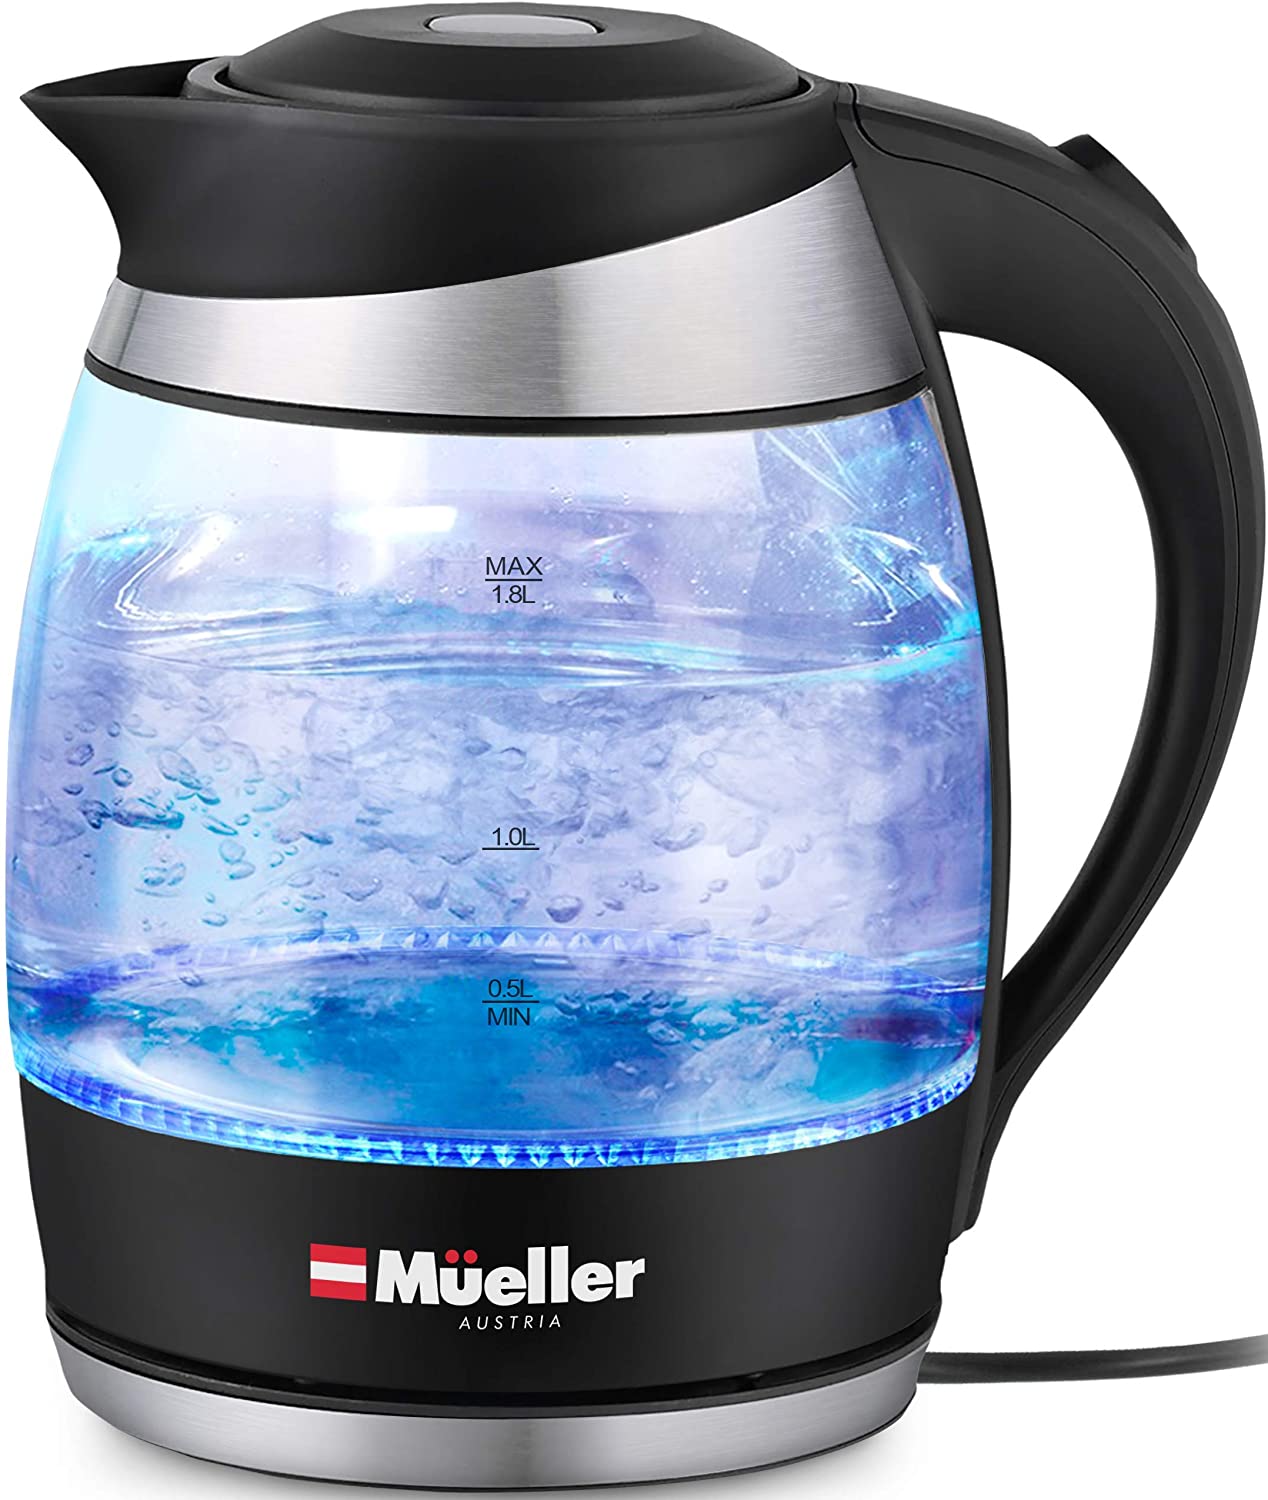 Mueller Austria M99S Clear Auto-Off Electric Kettle For Coffee